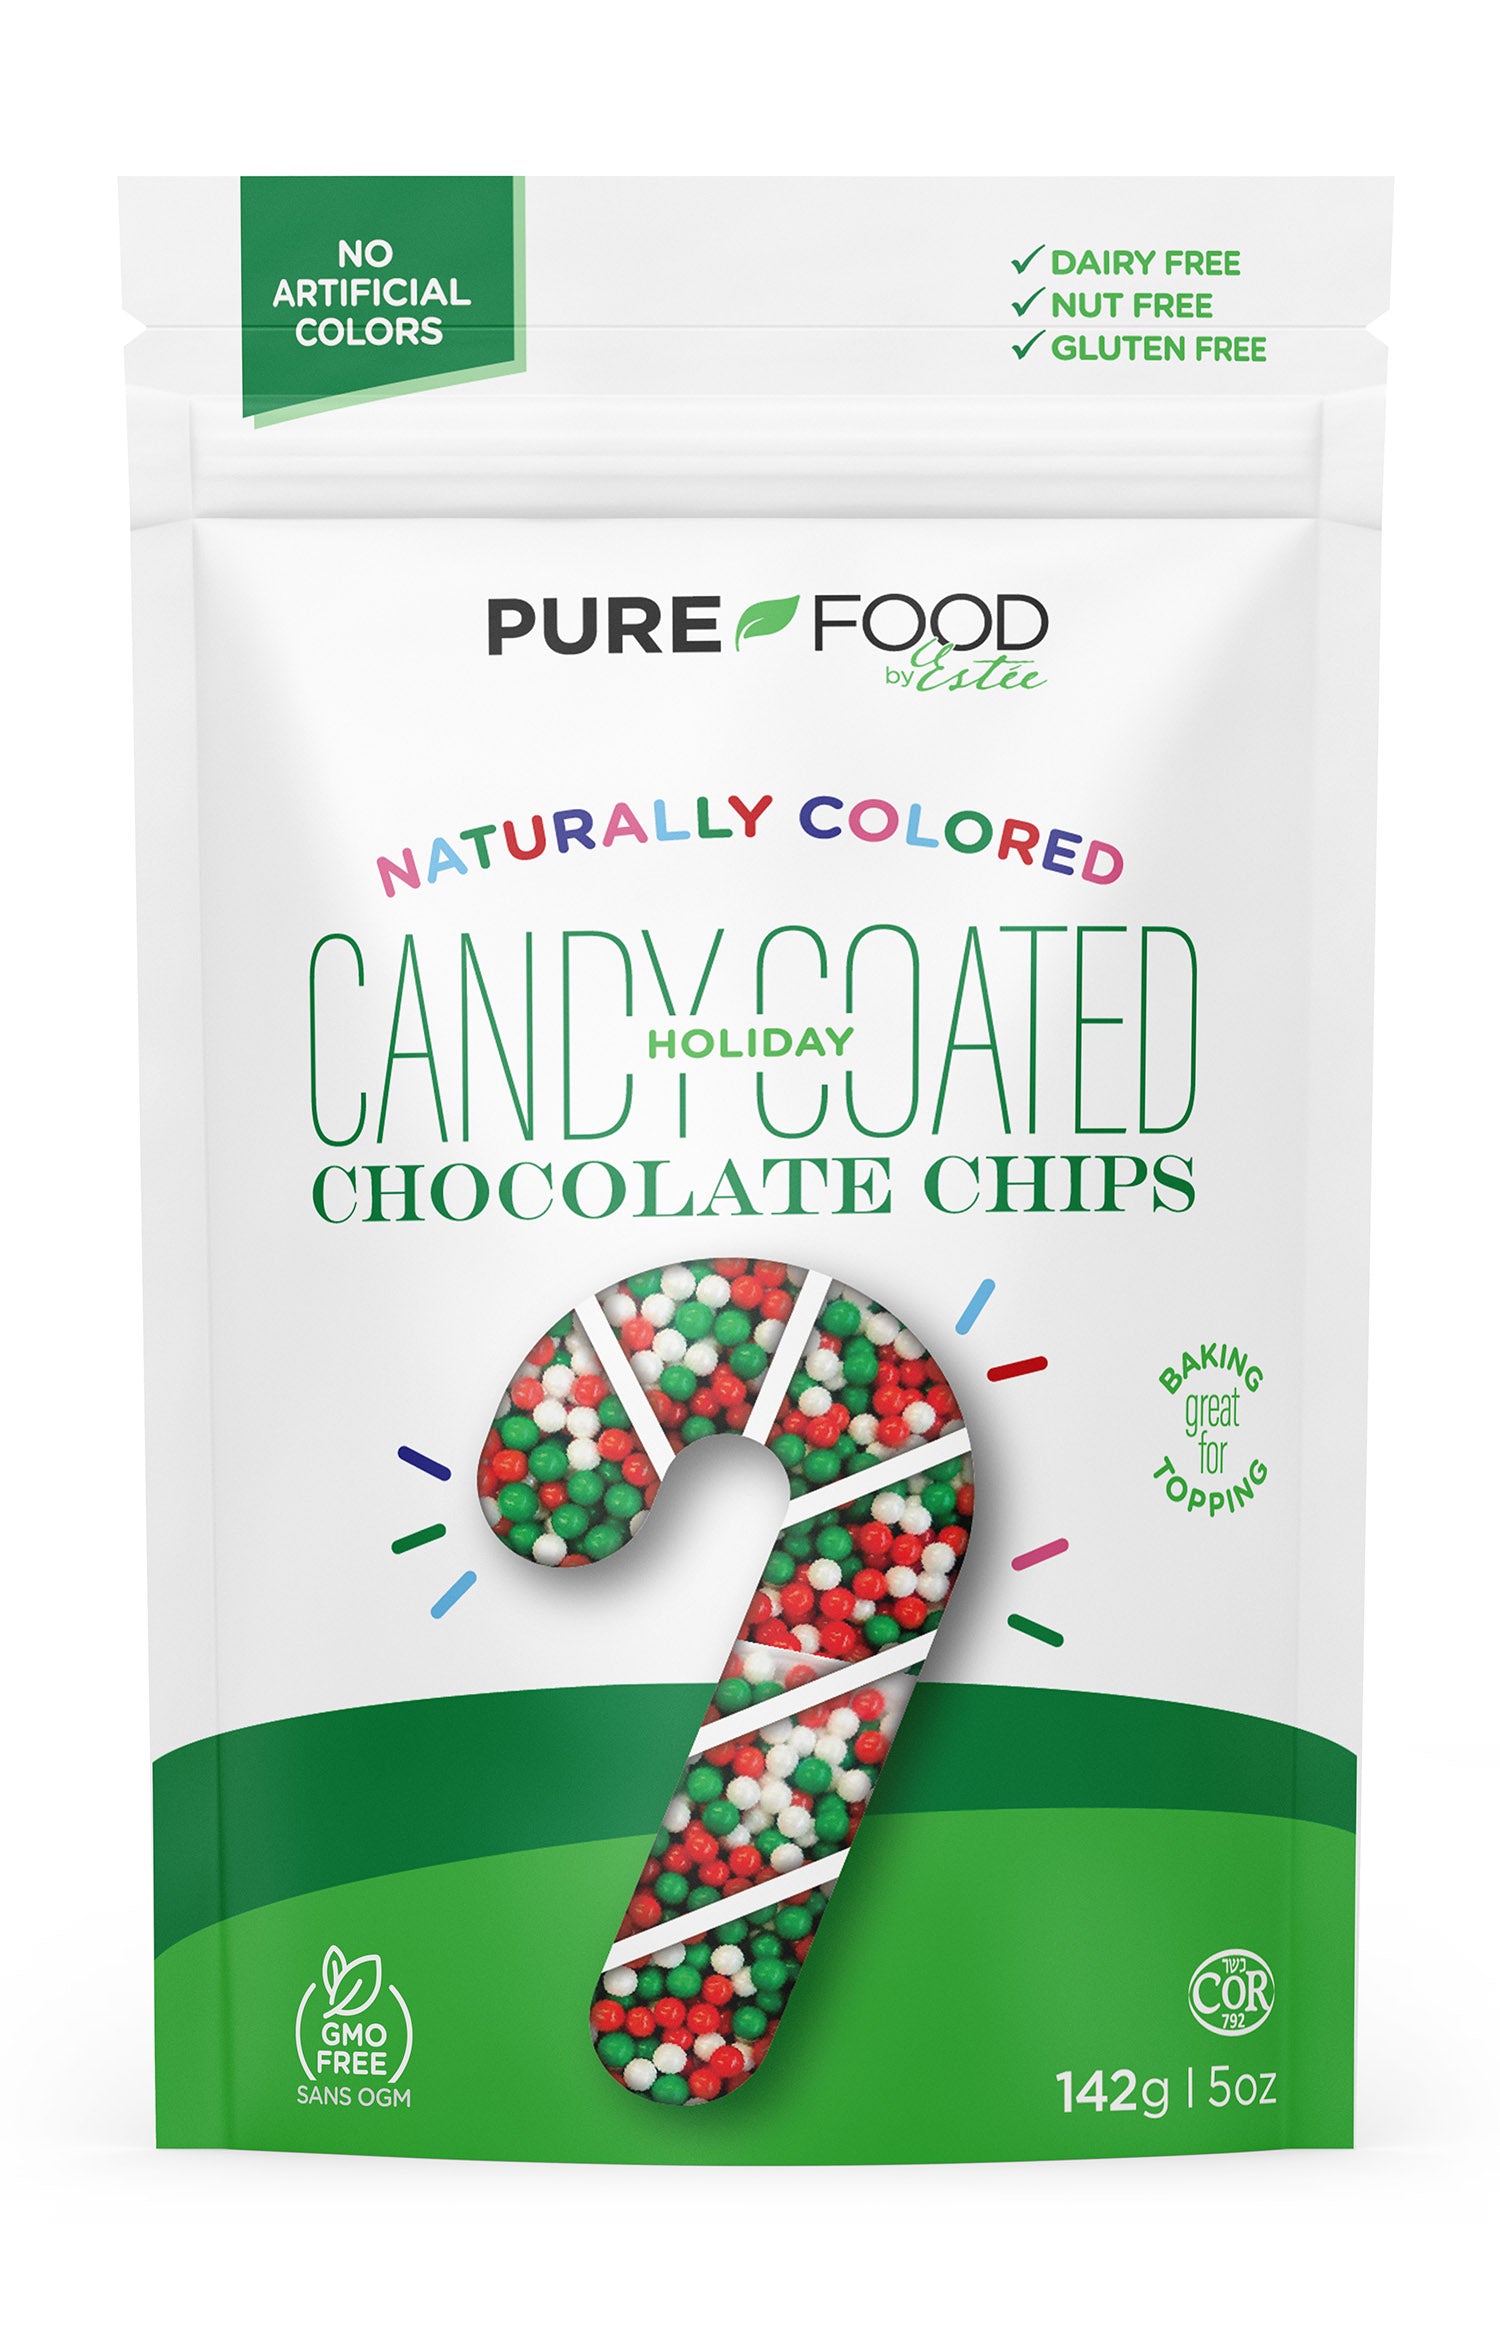 a bag of candy coated chocolate chips